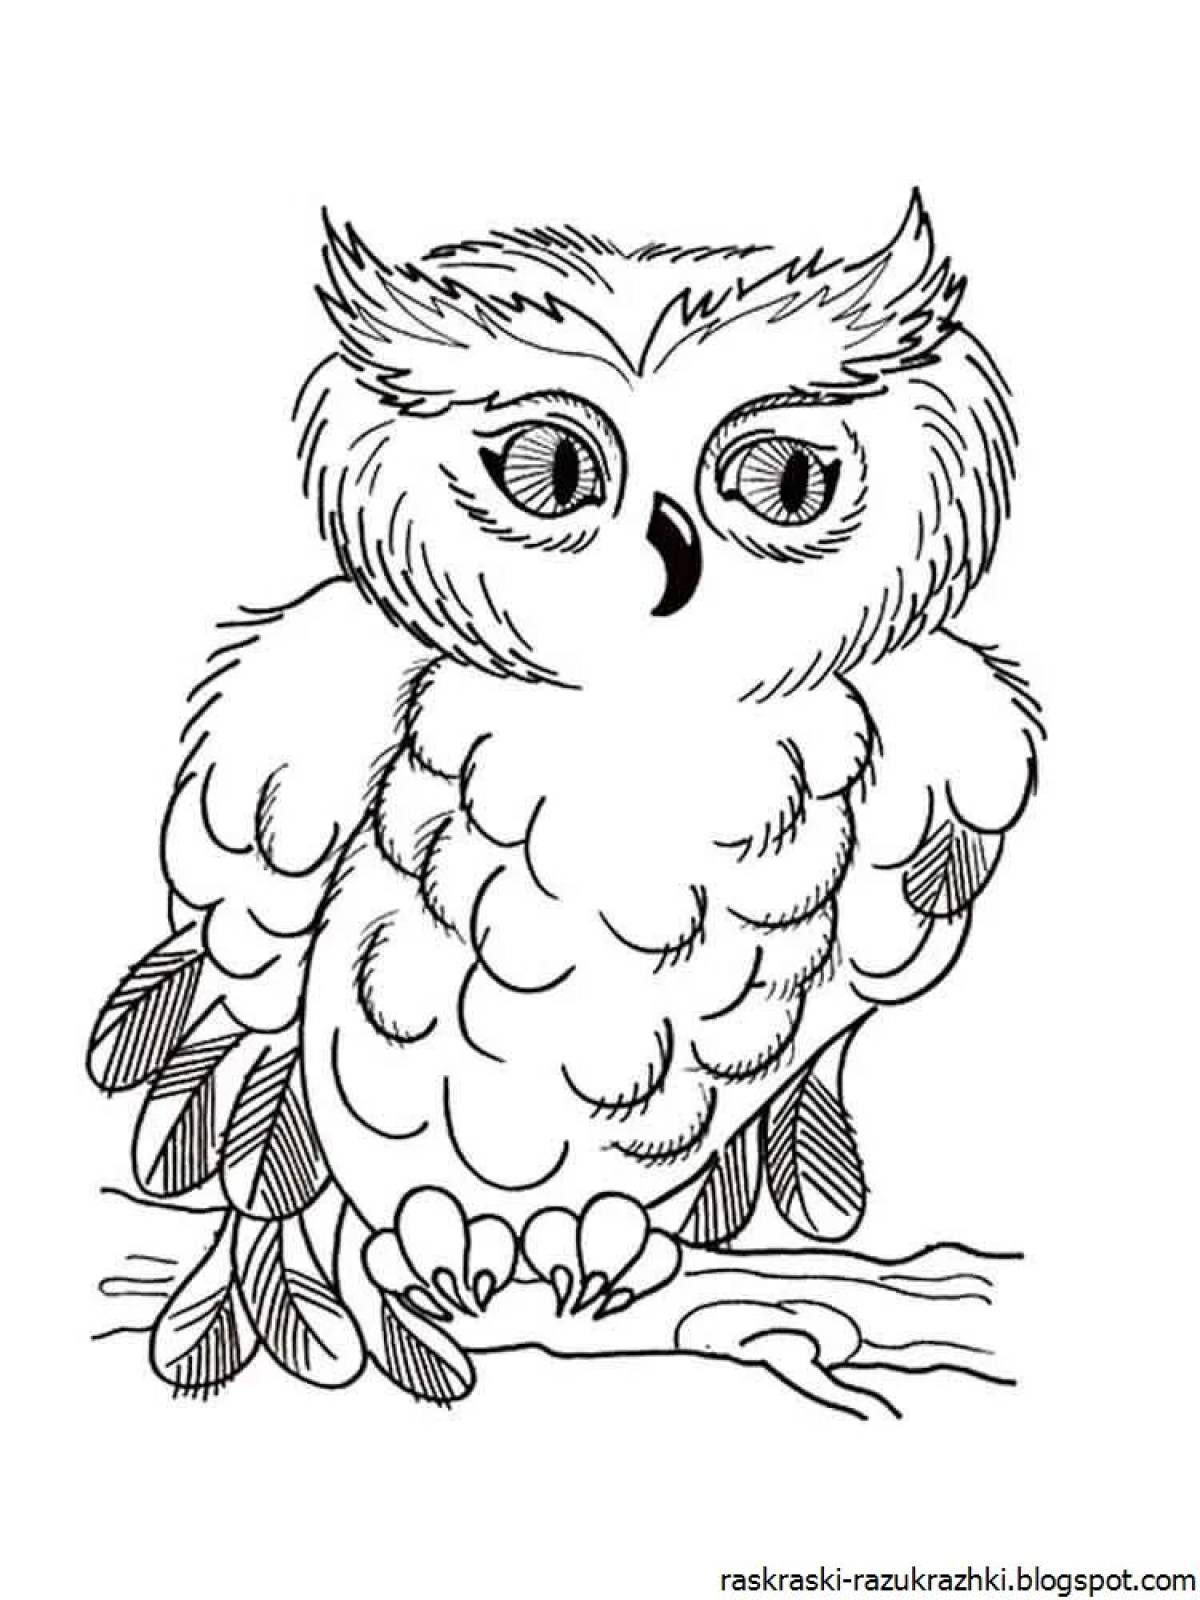 Owl picture for kids #7